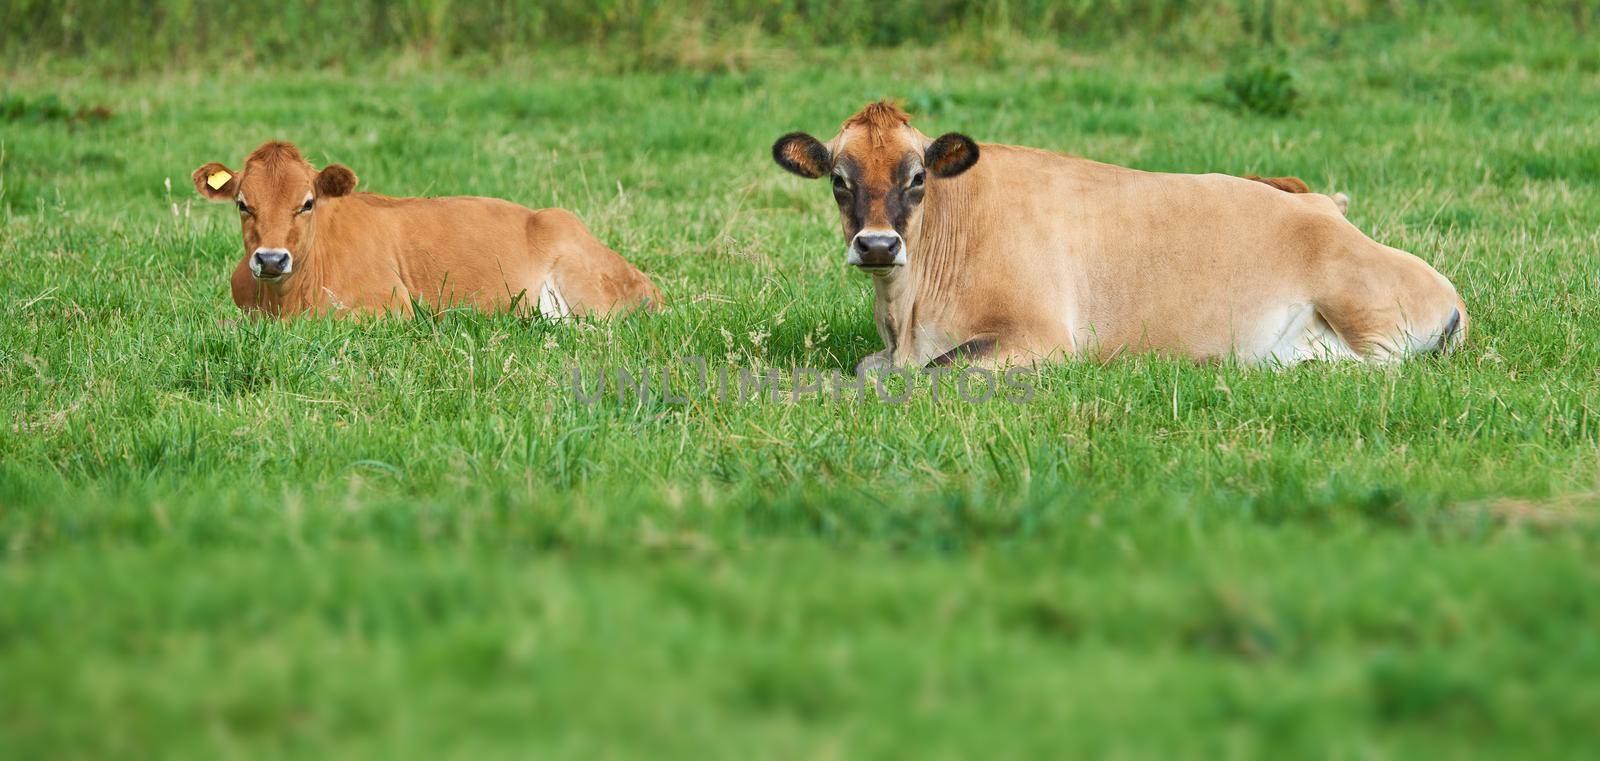 Two brown cow lying down on an organic green dairy farm in the countryside. Cattle or livestock in an open, empty and secluded grassy field or meadow. Animals in their natural environment in nature.